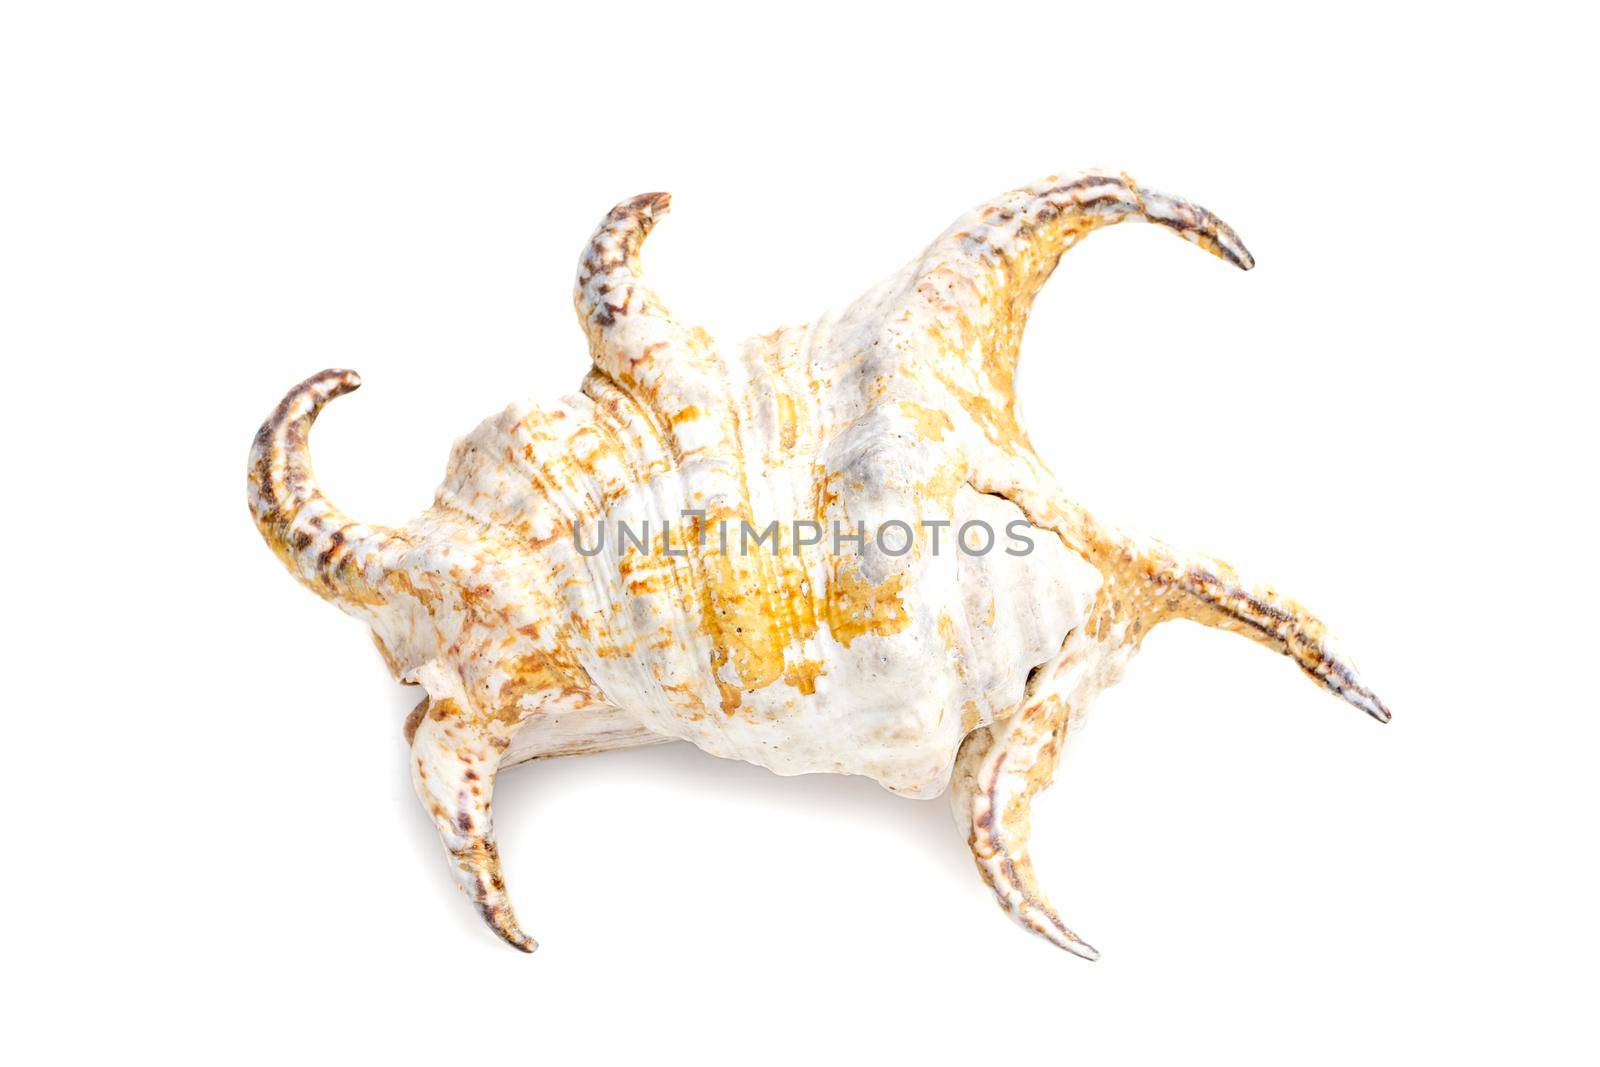 Image of Lambis chiragra, Harpago chiragra on a white background. Undersea Animals. Sea shells. by yod67